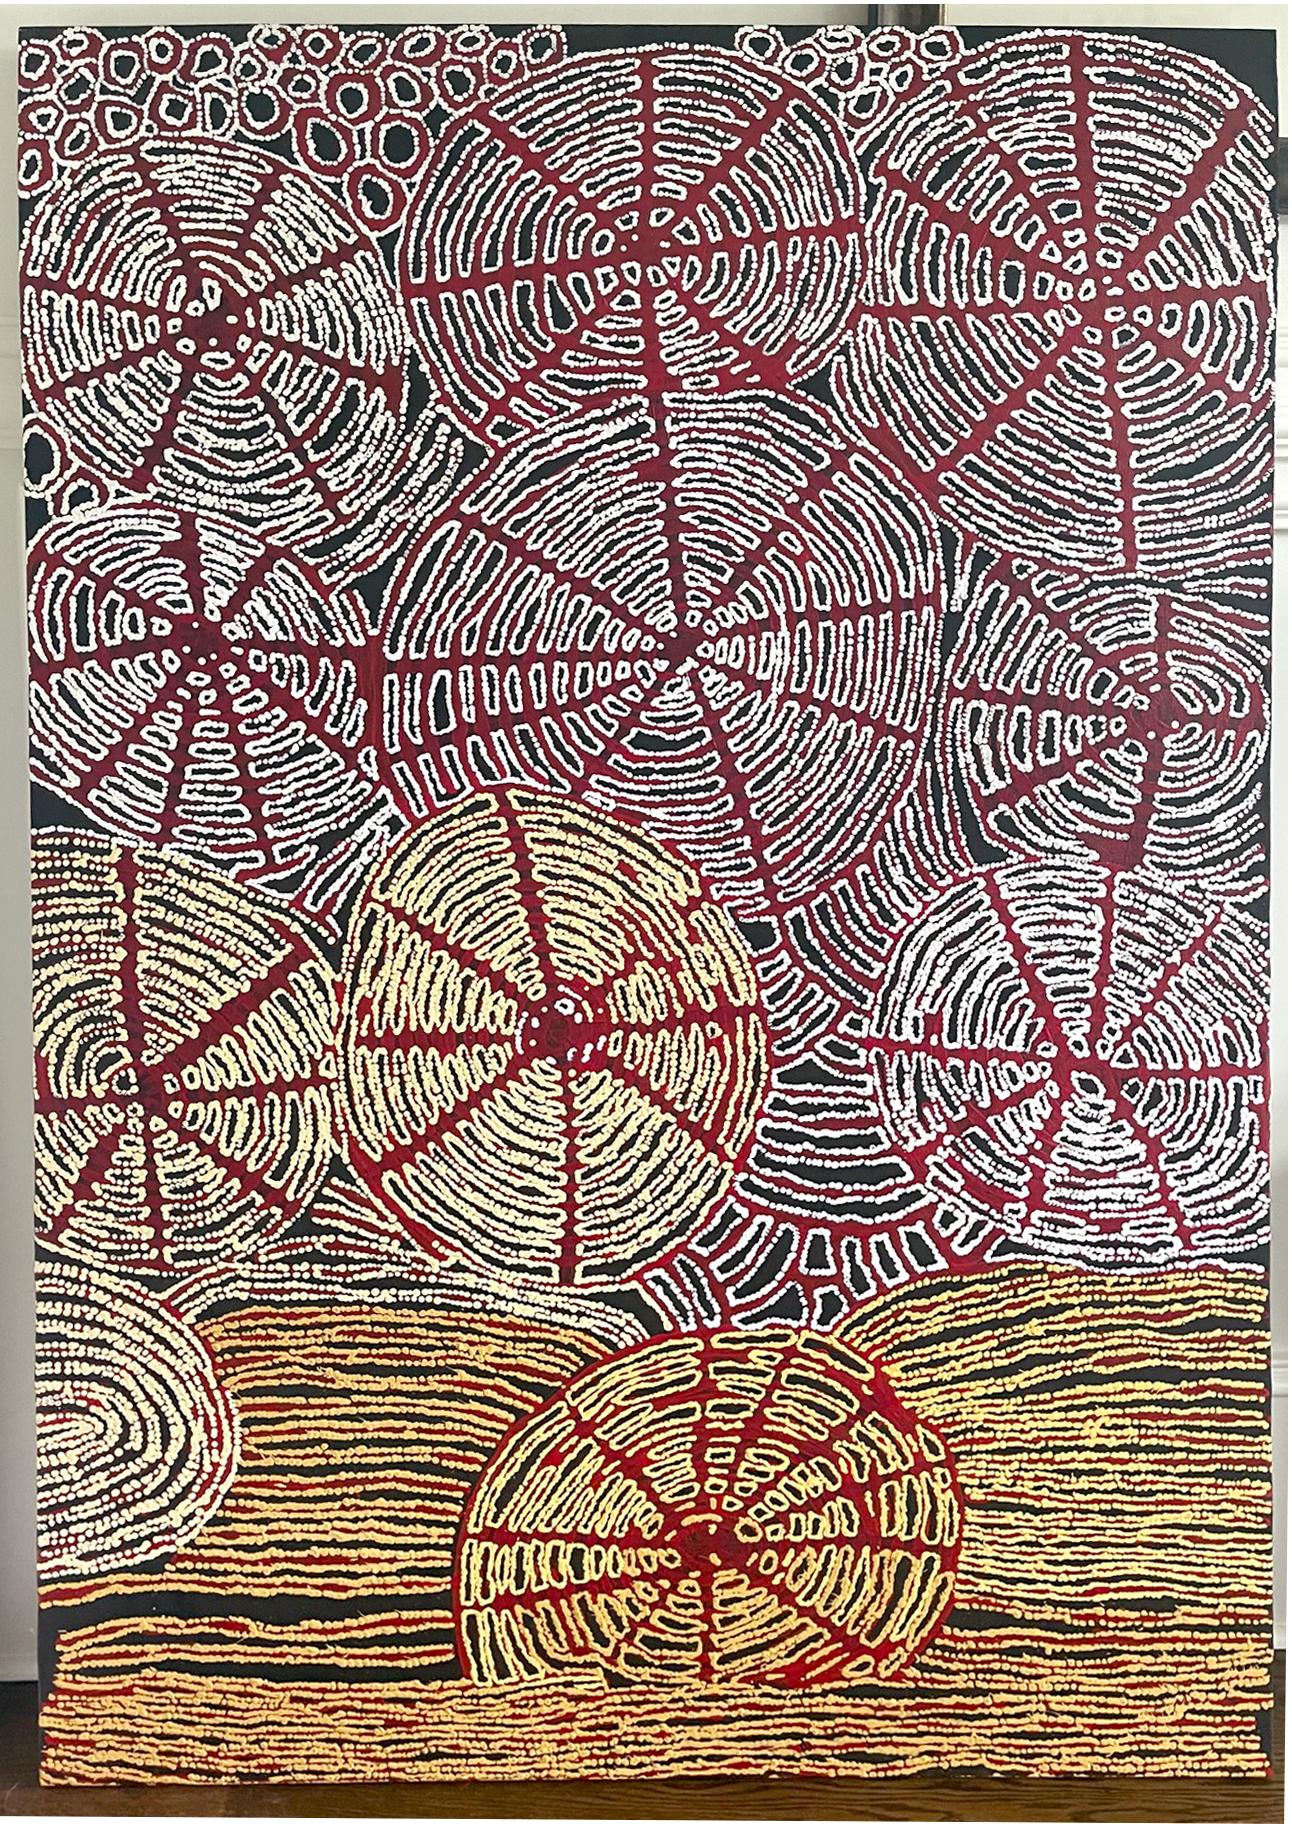 A striking abstract painting by Australian Aboriginal painter Walangkura Napanangka (1940-2014), one of the matching pair painted in 2007 in Alice Spring. Entitled 